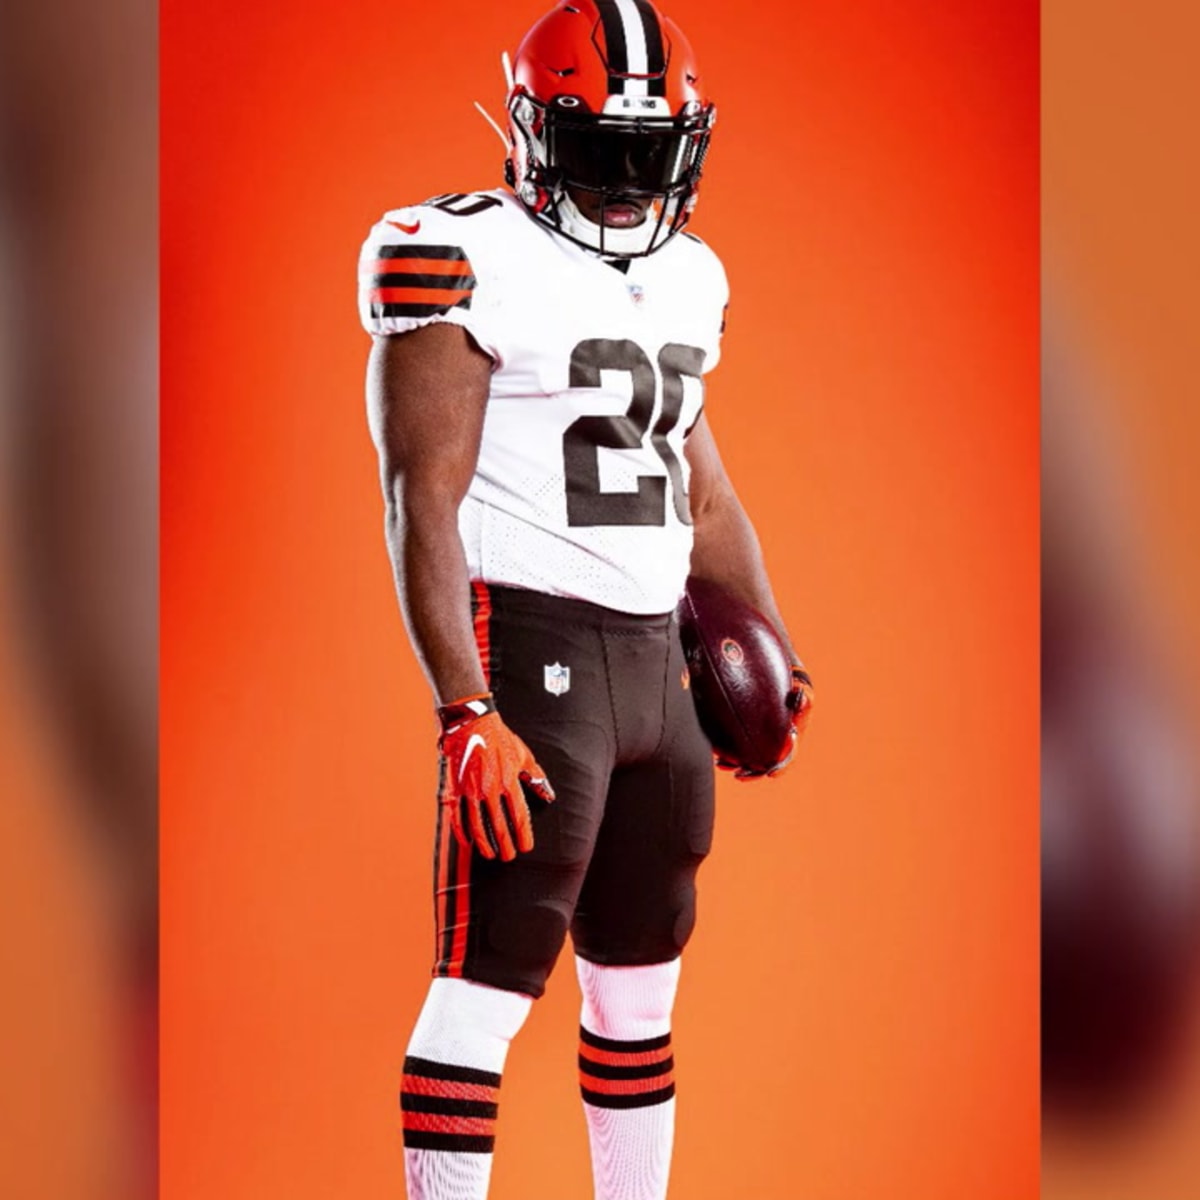 buy,cleveland browns throwback jersey,Free delivery!www